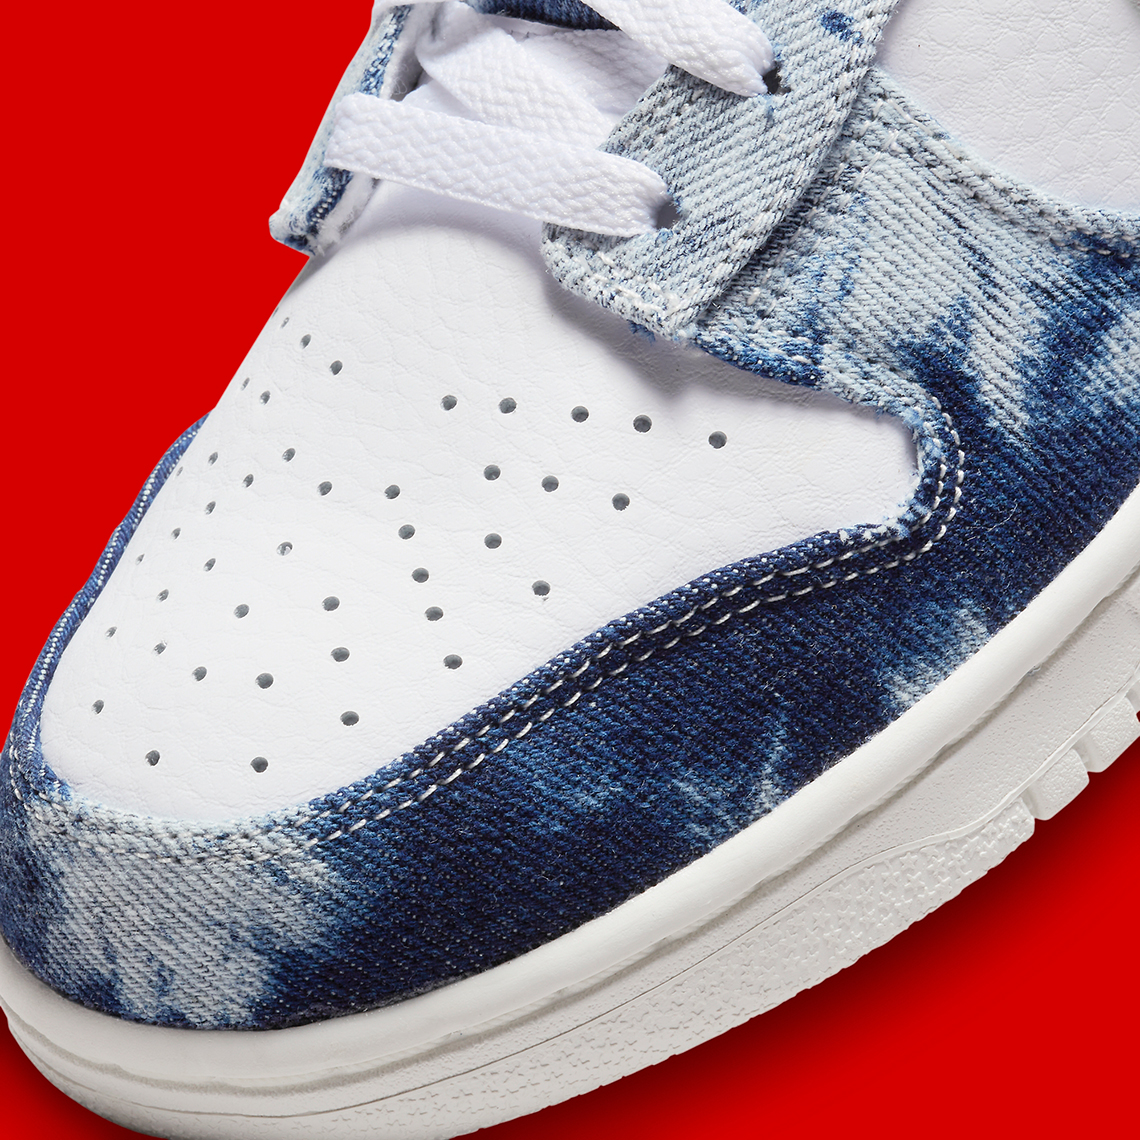 Nike Dunk Low Washed Denim Review& On foot 